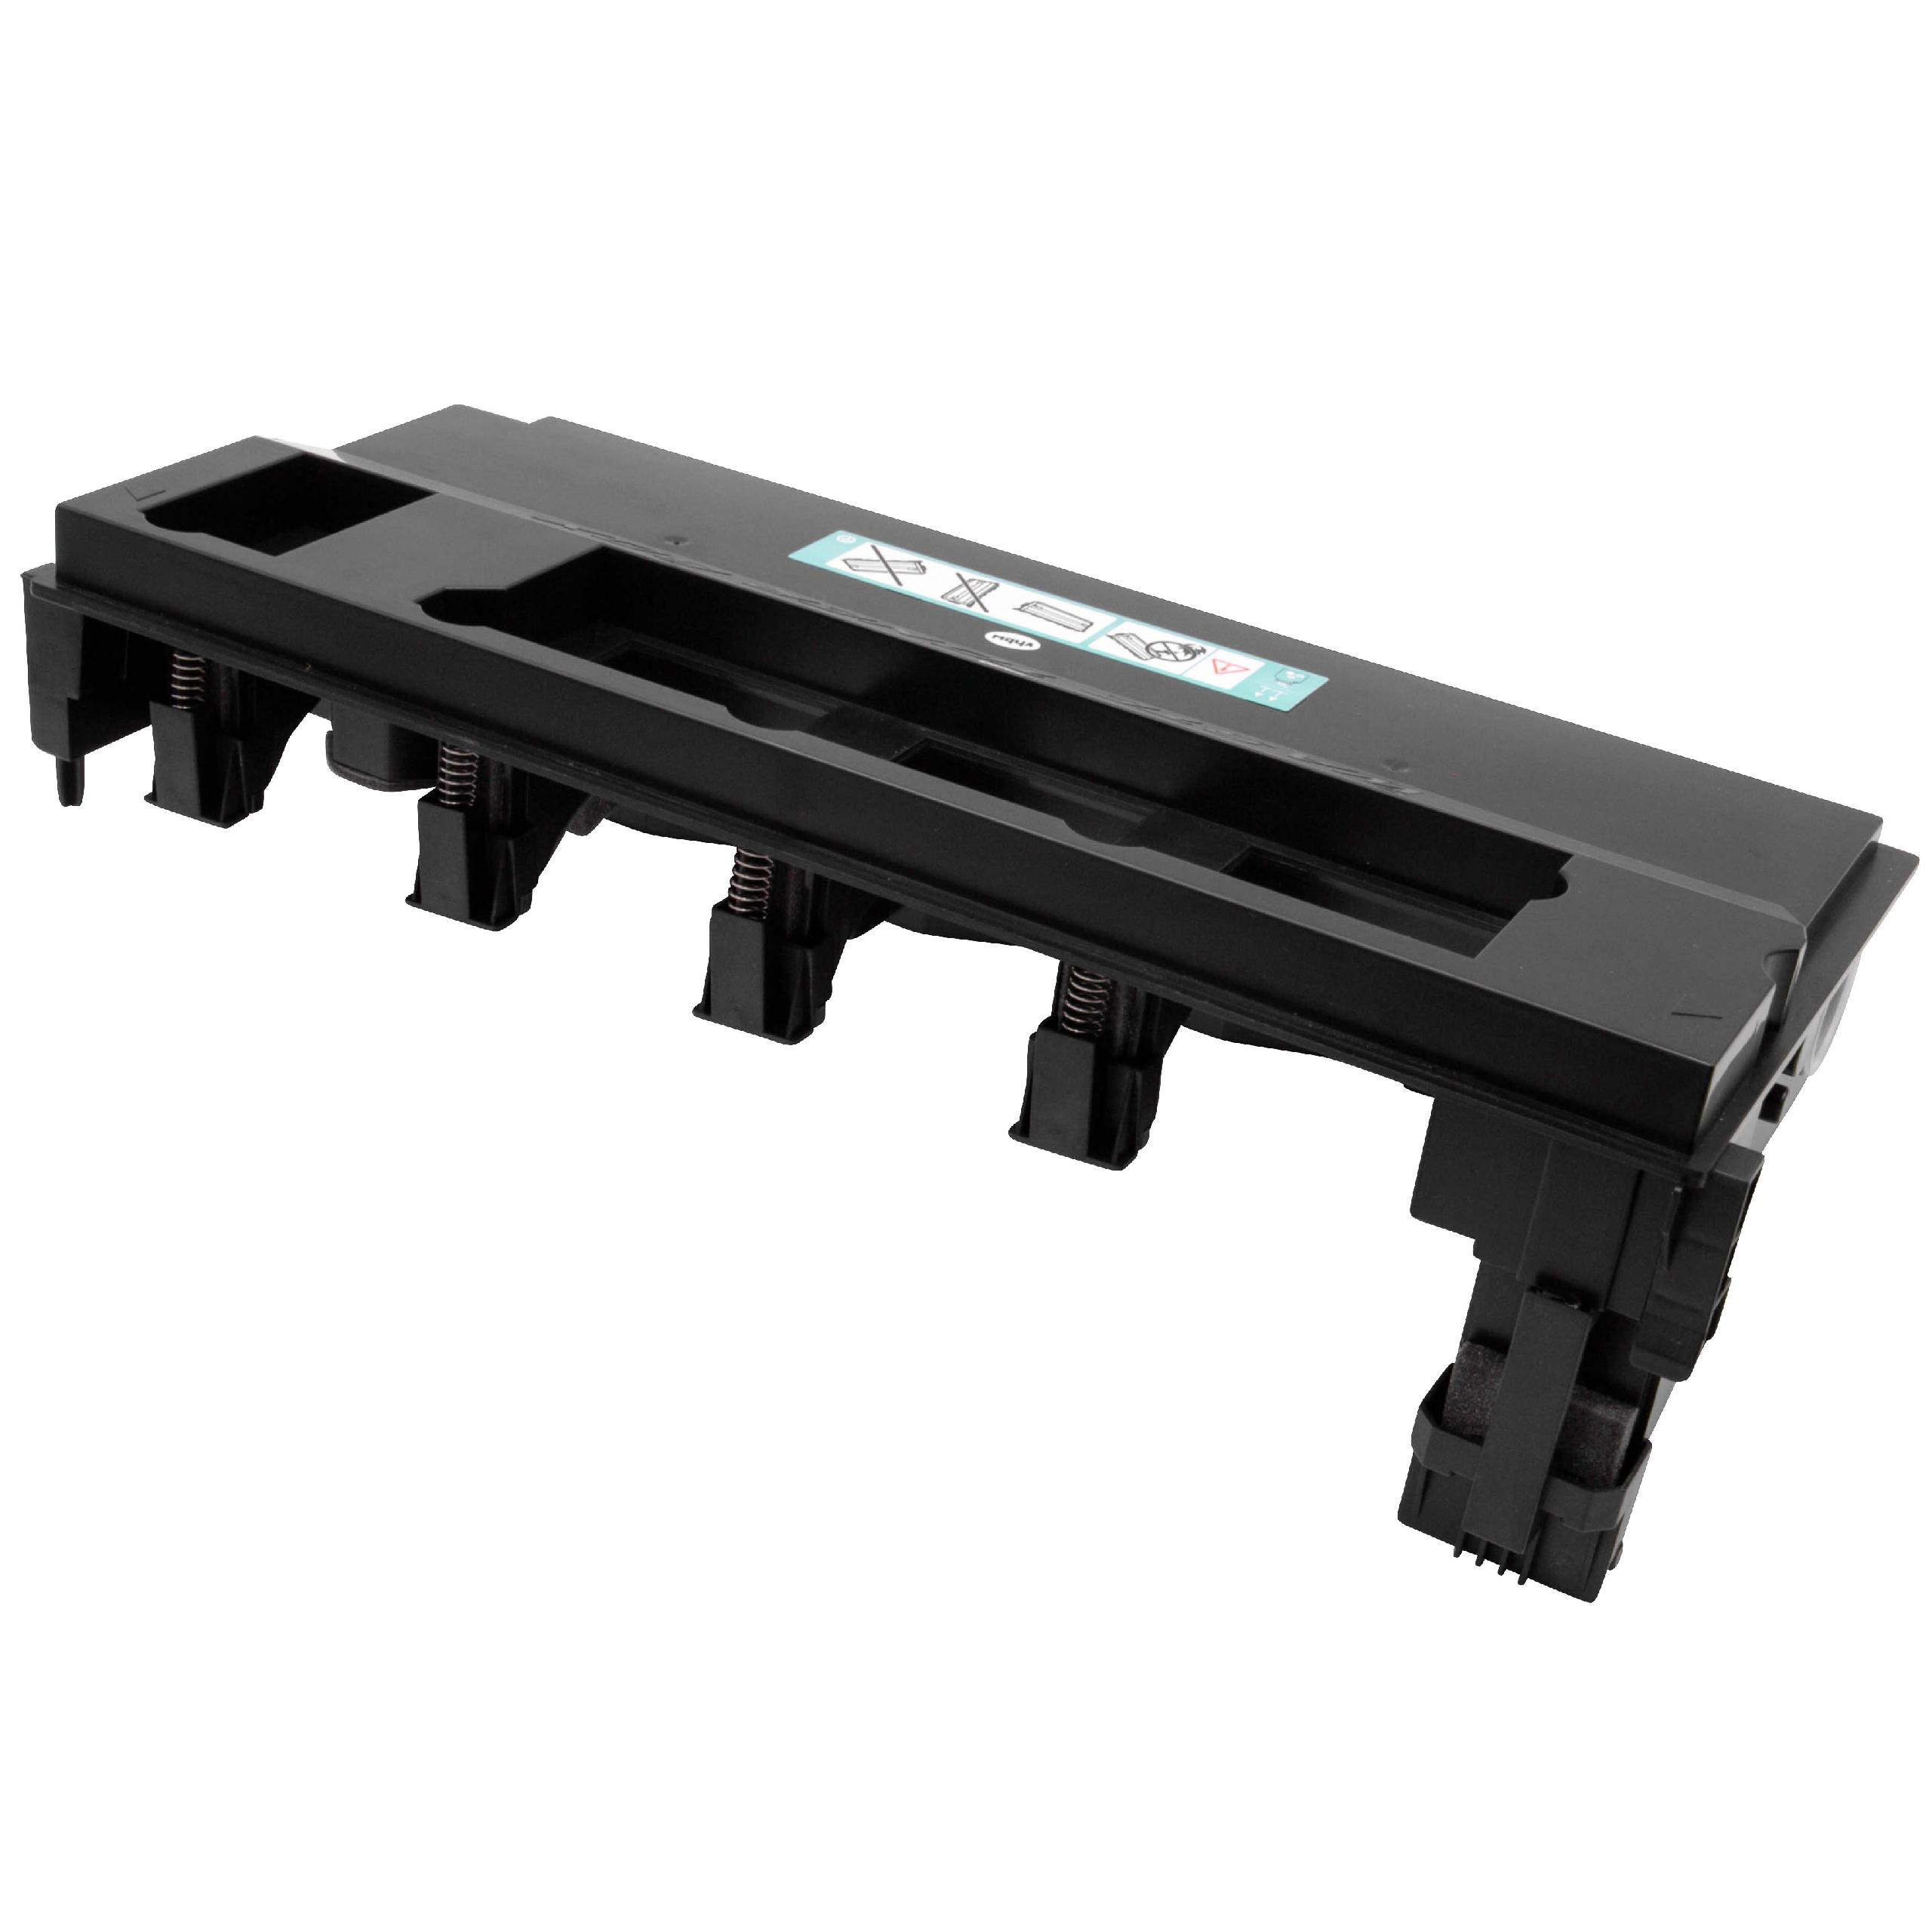 Waste Toner Container as Replacement for Konica Minolta WX-101, A162WYA, A162WY1 - Black